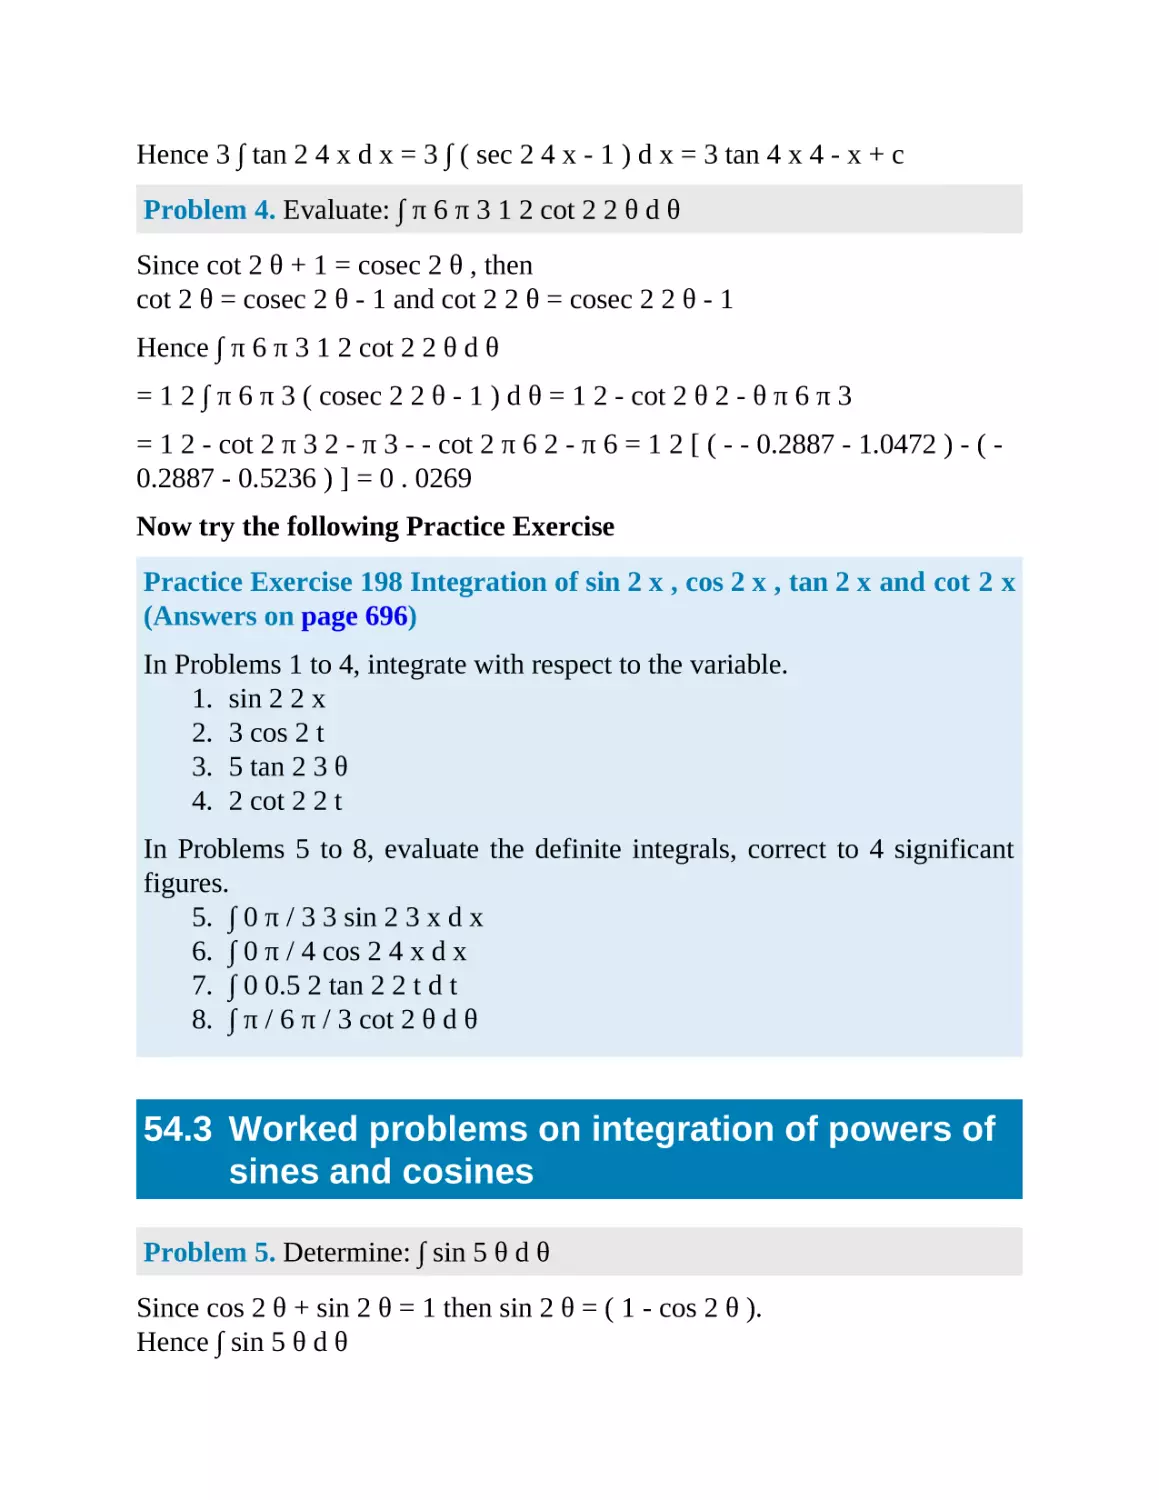 54.3 Worked problems on integration of powers of sines and cosines